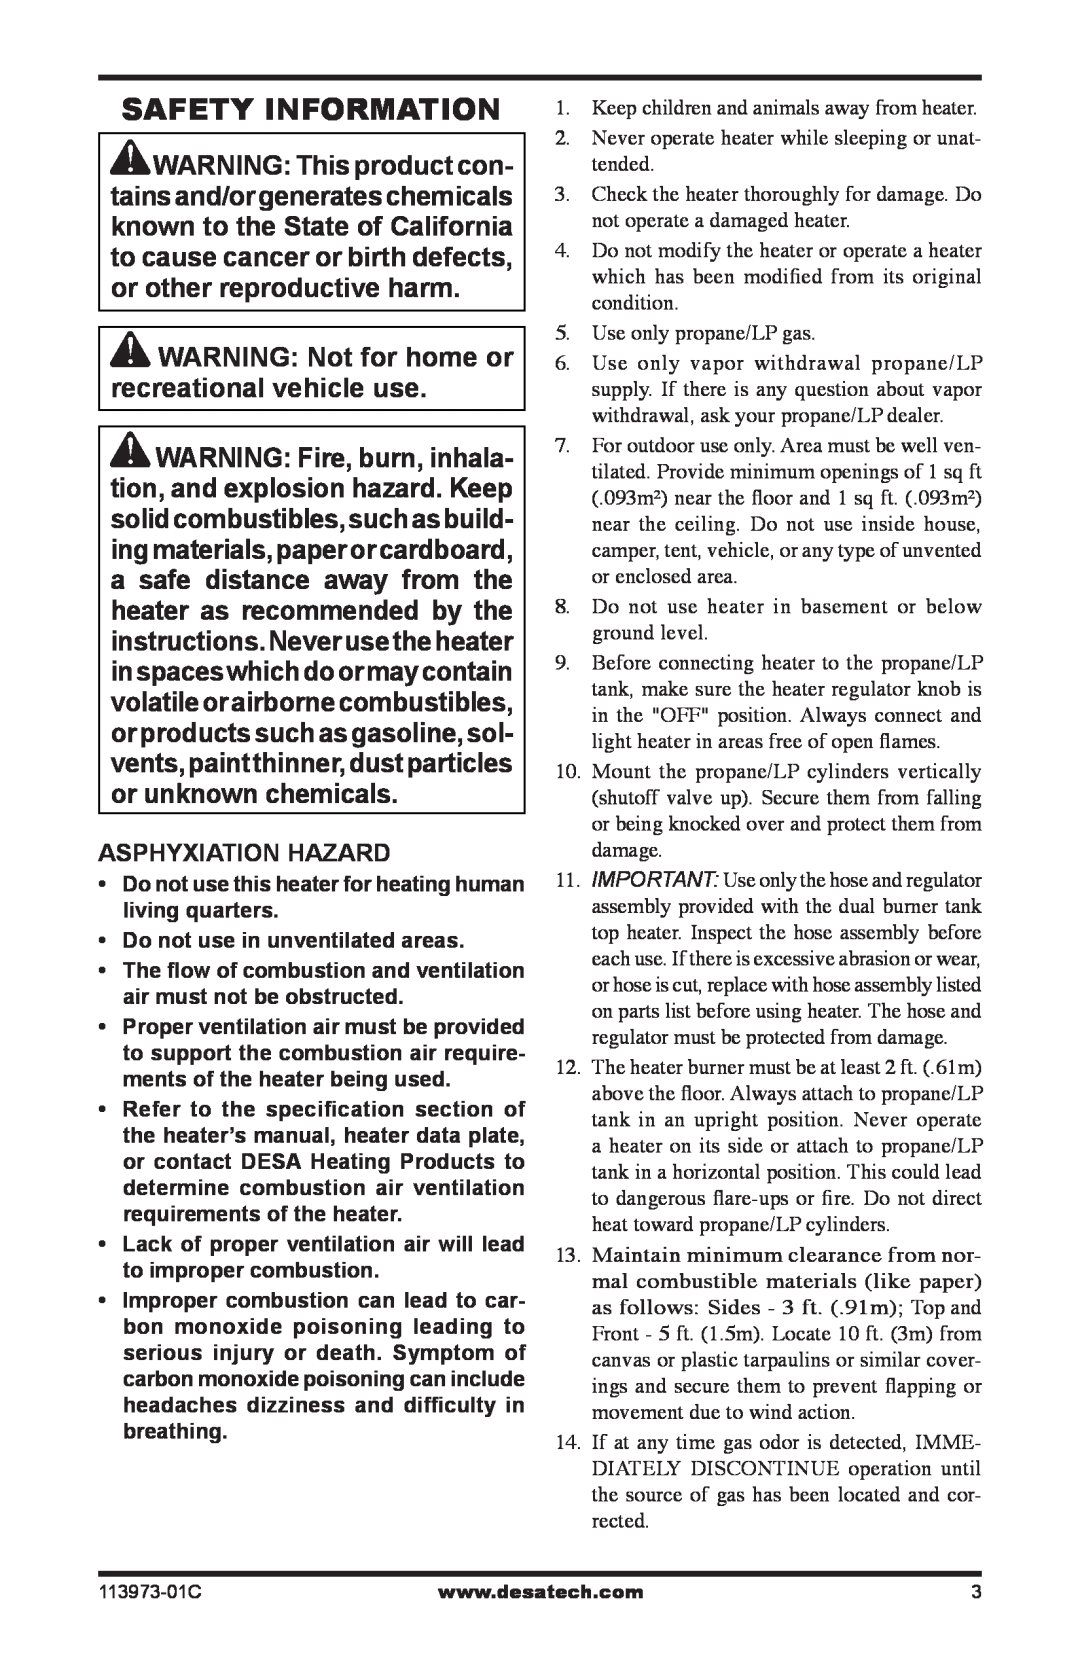 Desa HD30, TT30, N15A, HD15A Safety Information, WARNING Not for home or recreational vehicle use, Asphyxiation Hazard 